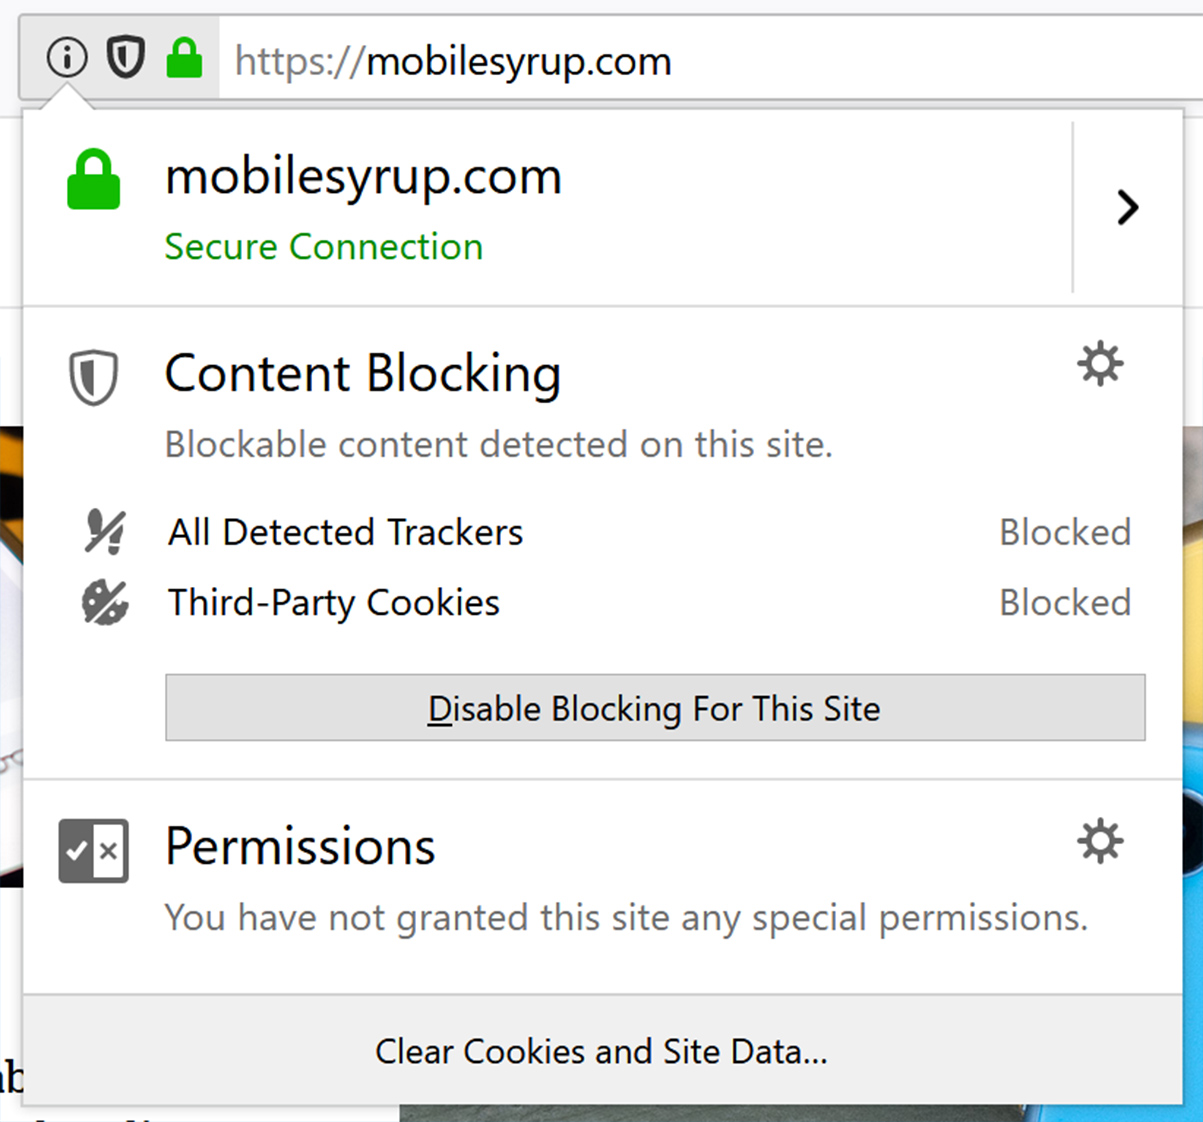 Firefox 63 released with 'always-on' tracking protection